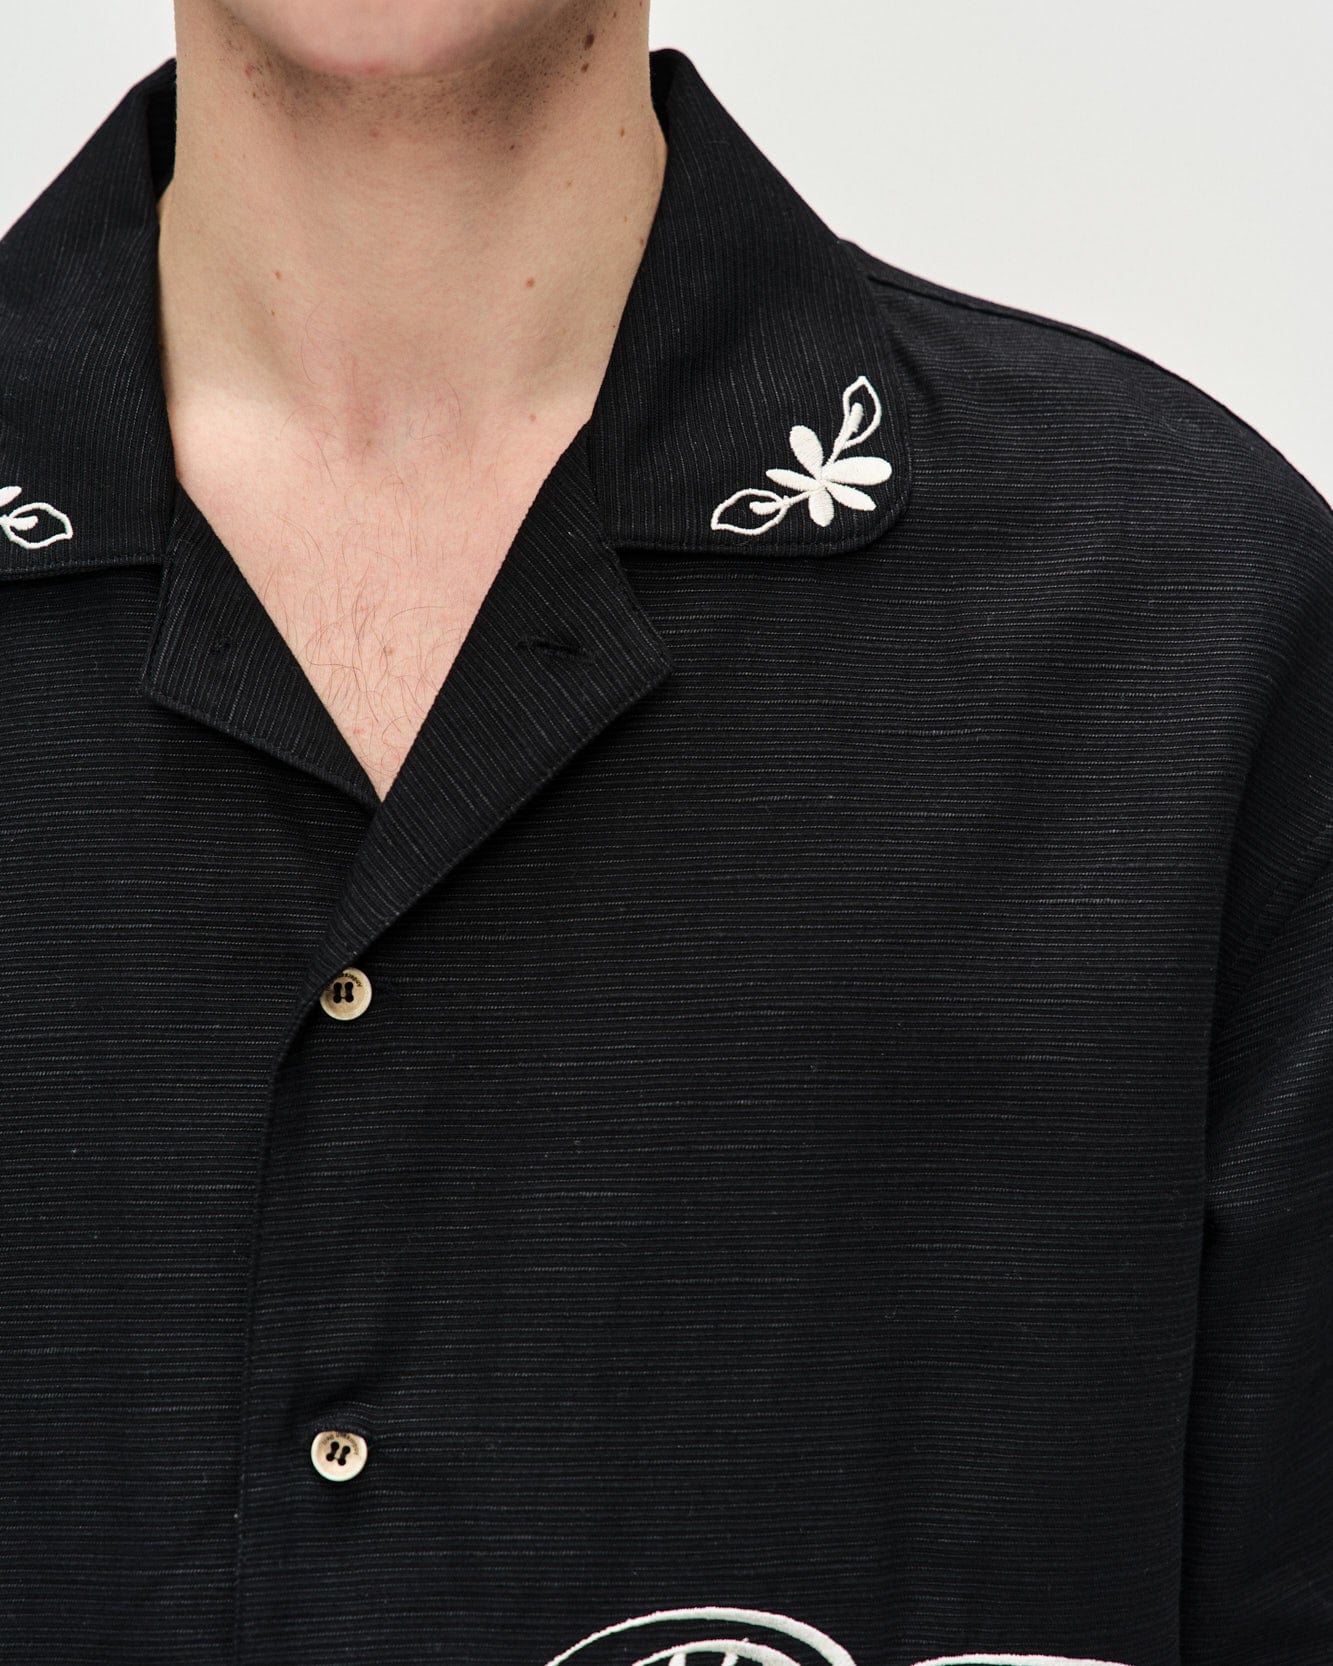 Andersson Bell MAY EMBROIDERY OPEN COLLAR SHIRTS atb1055m(BLACK)